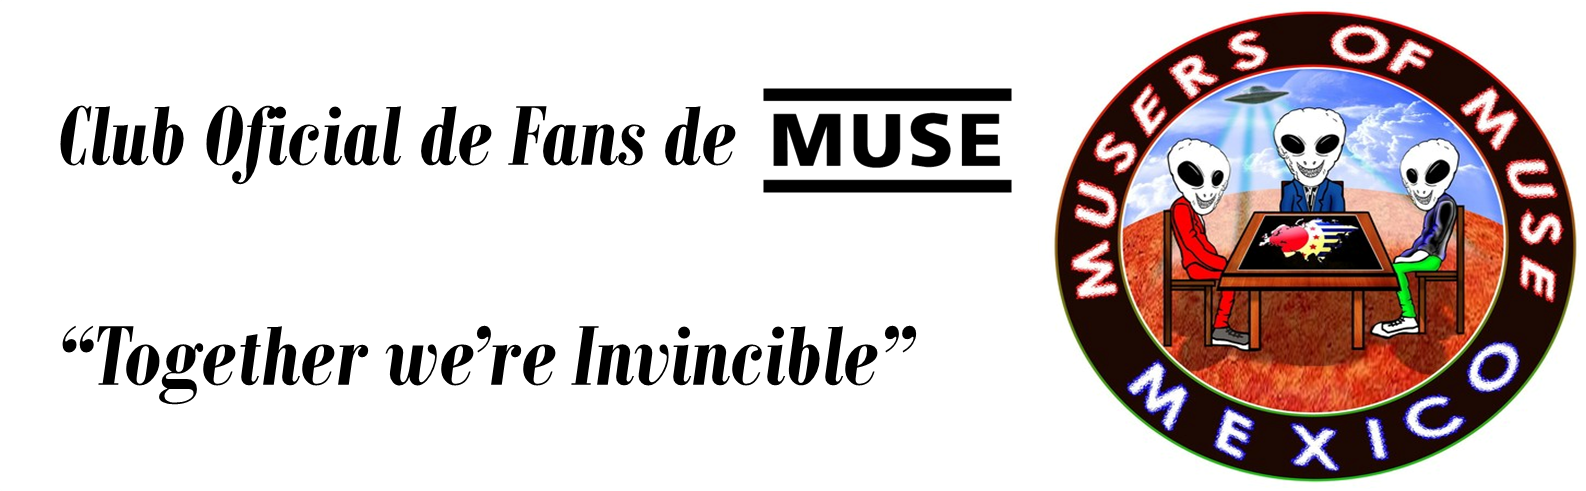 Musers of Muse